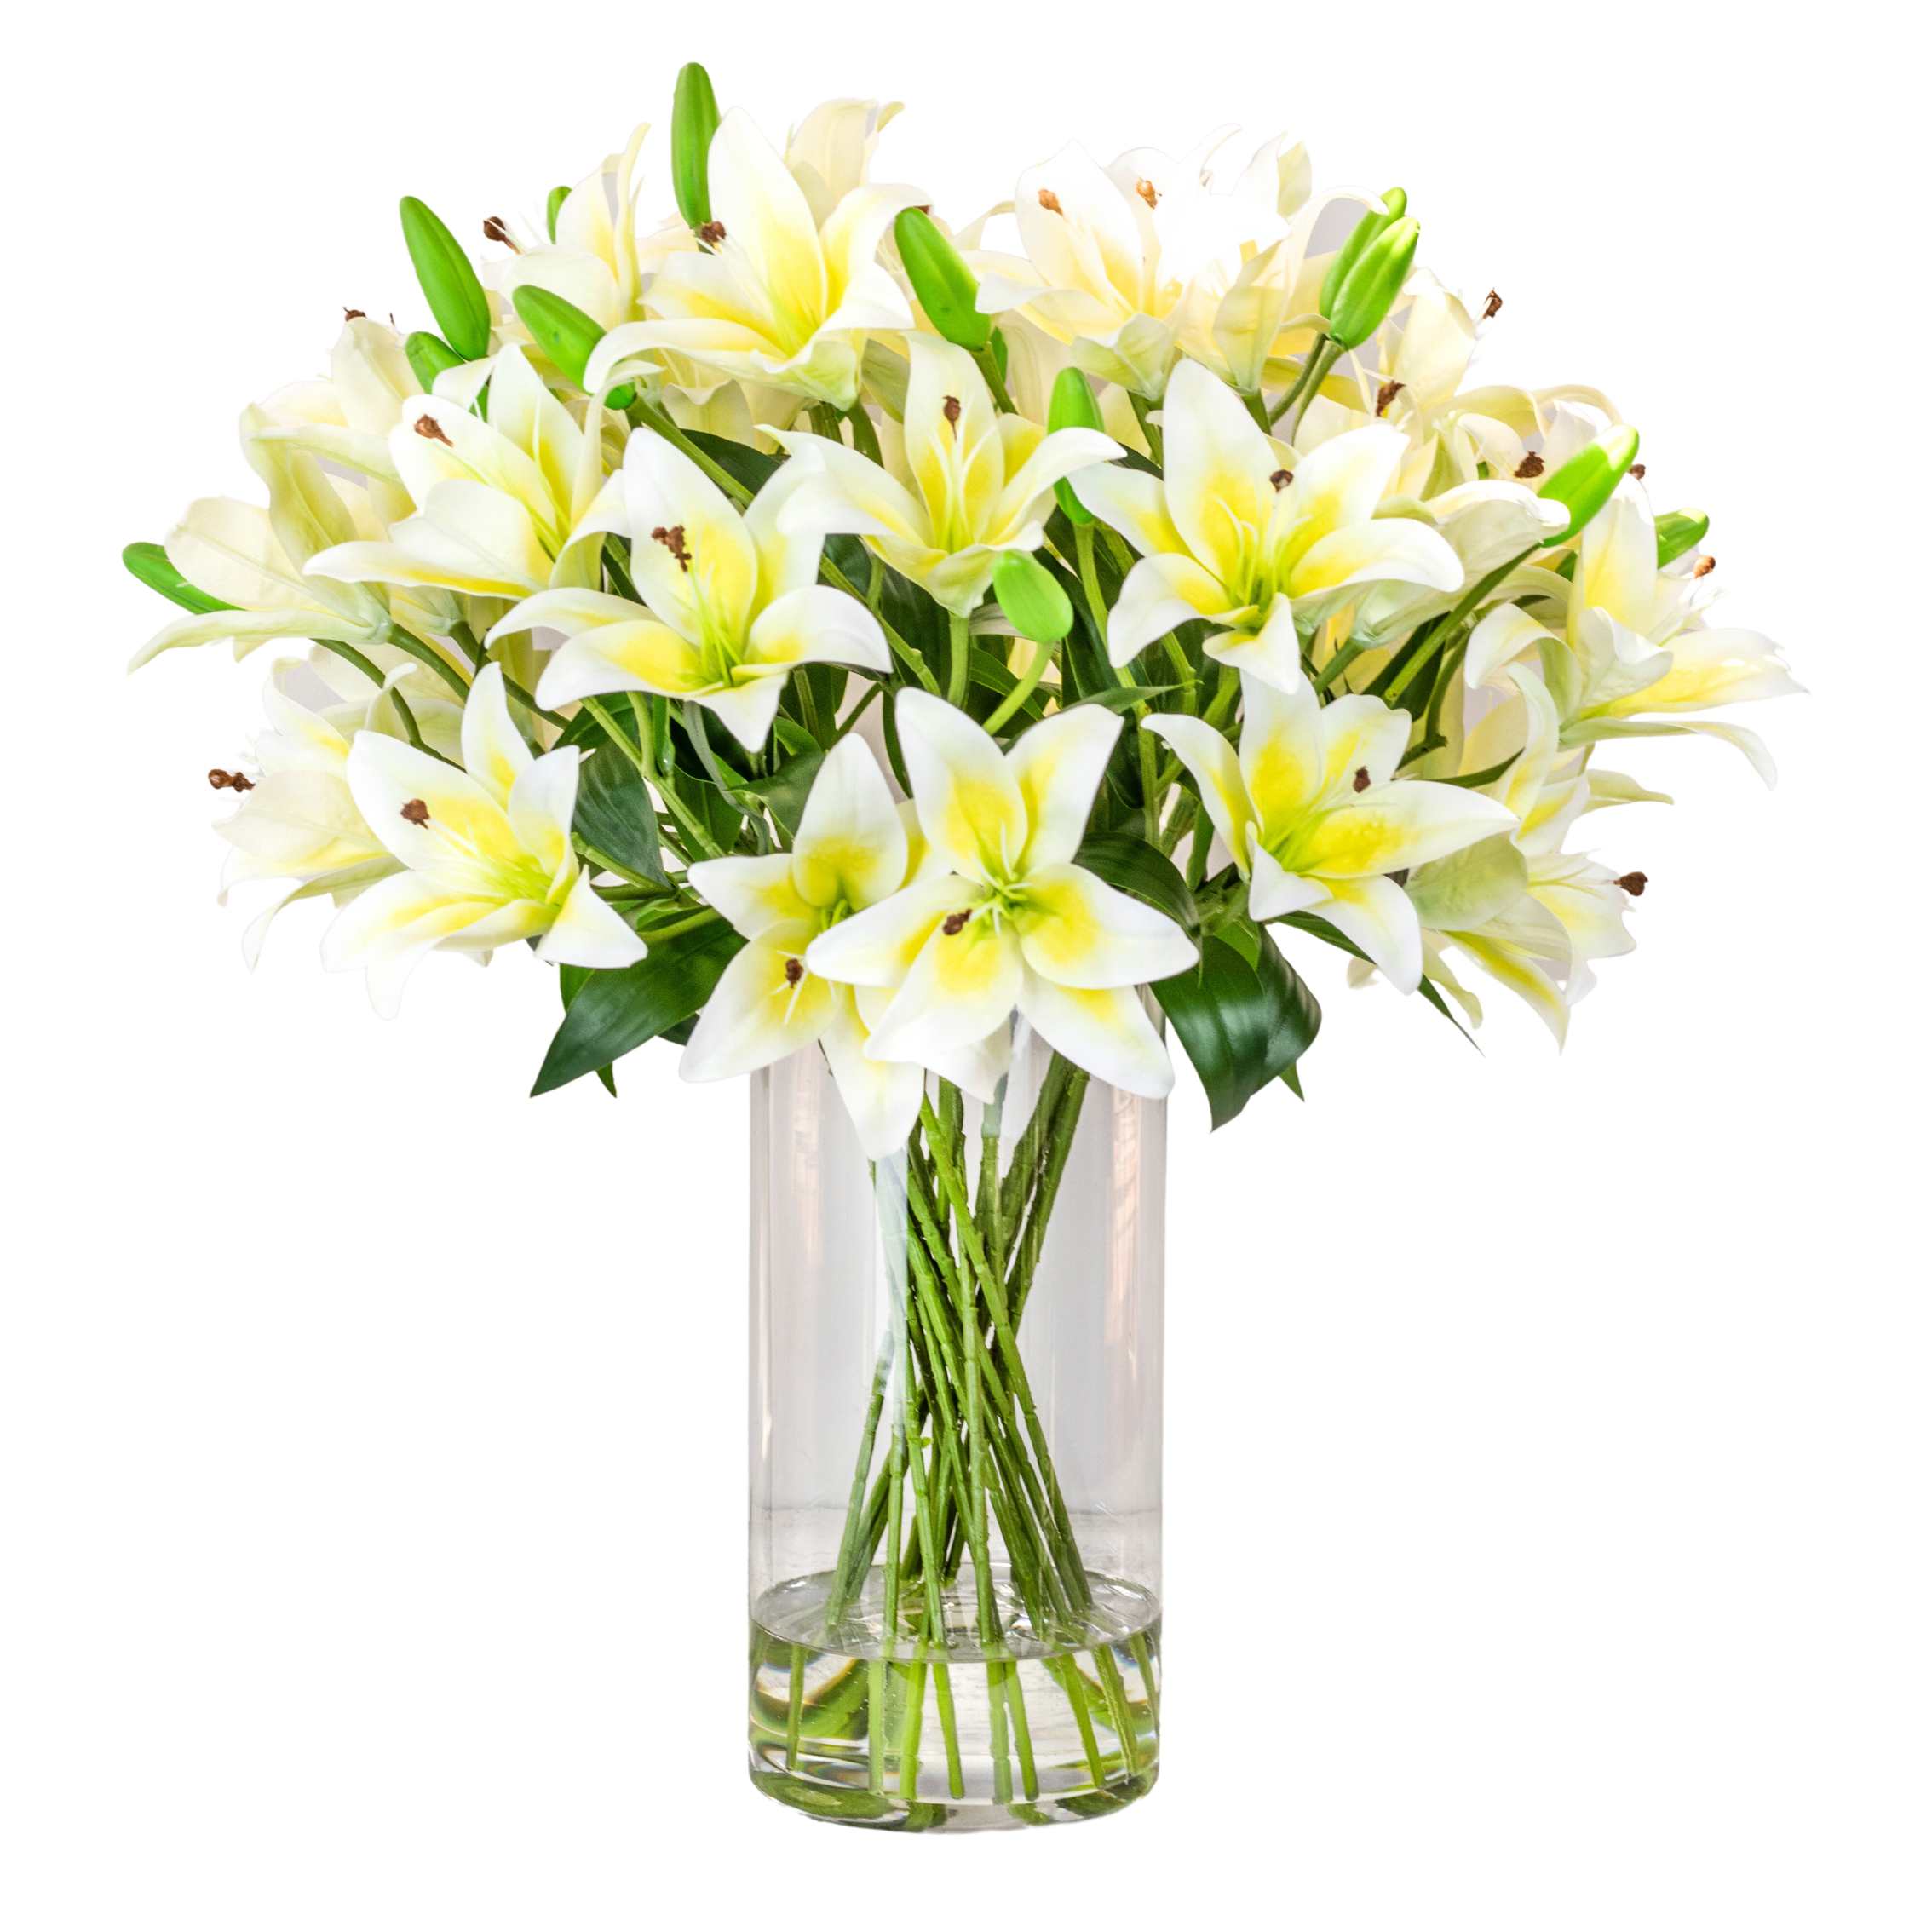 Artificial white lily arrangement set in a tall glass vase